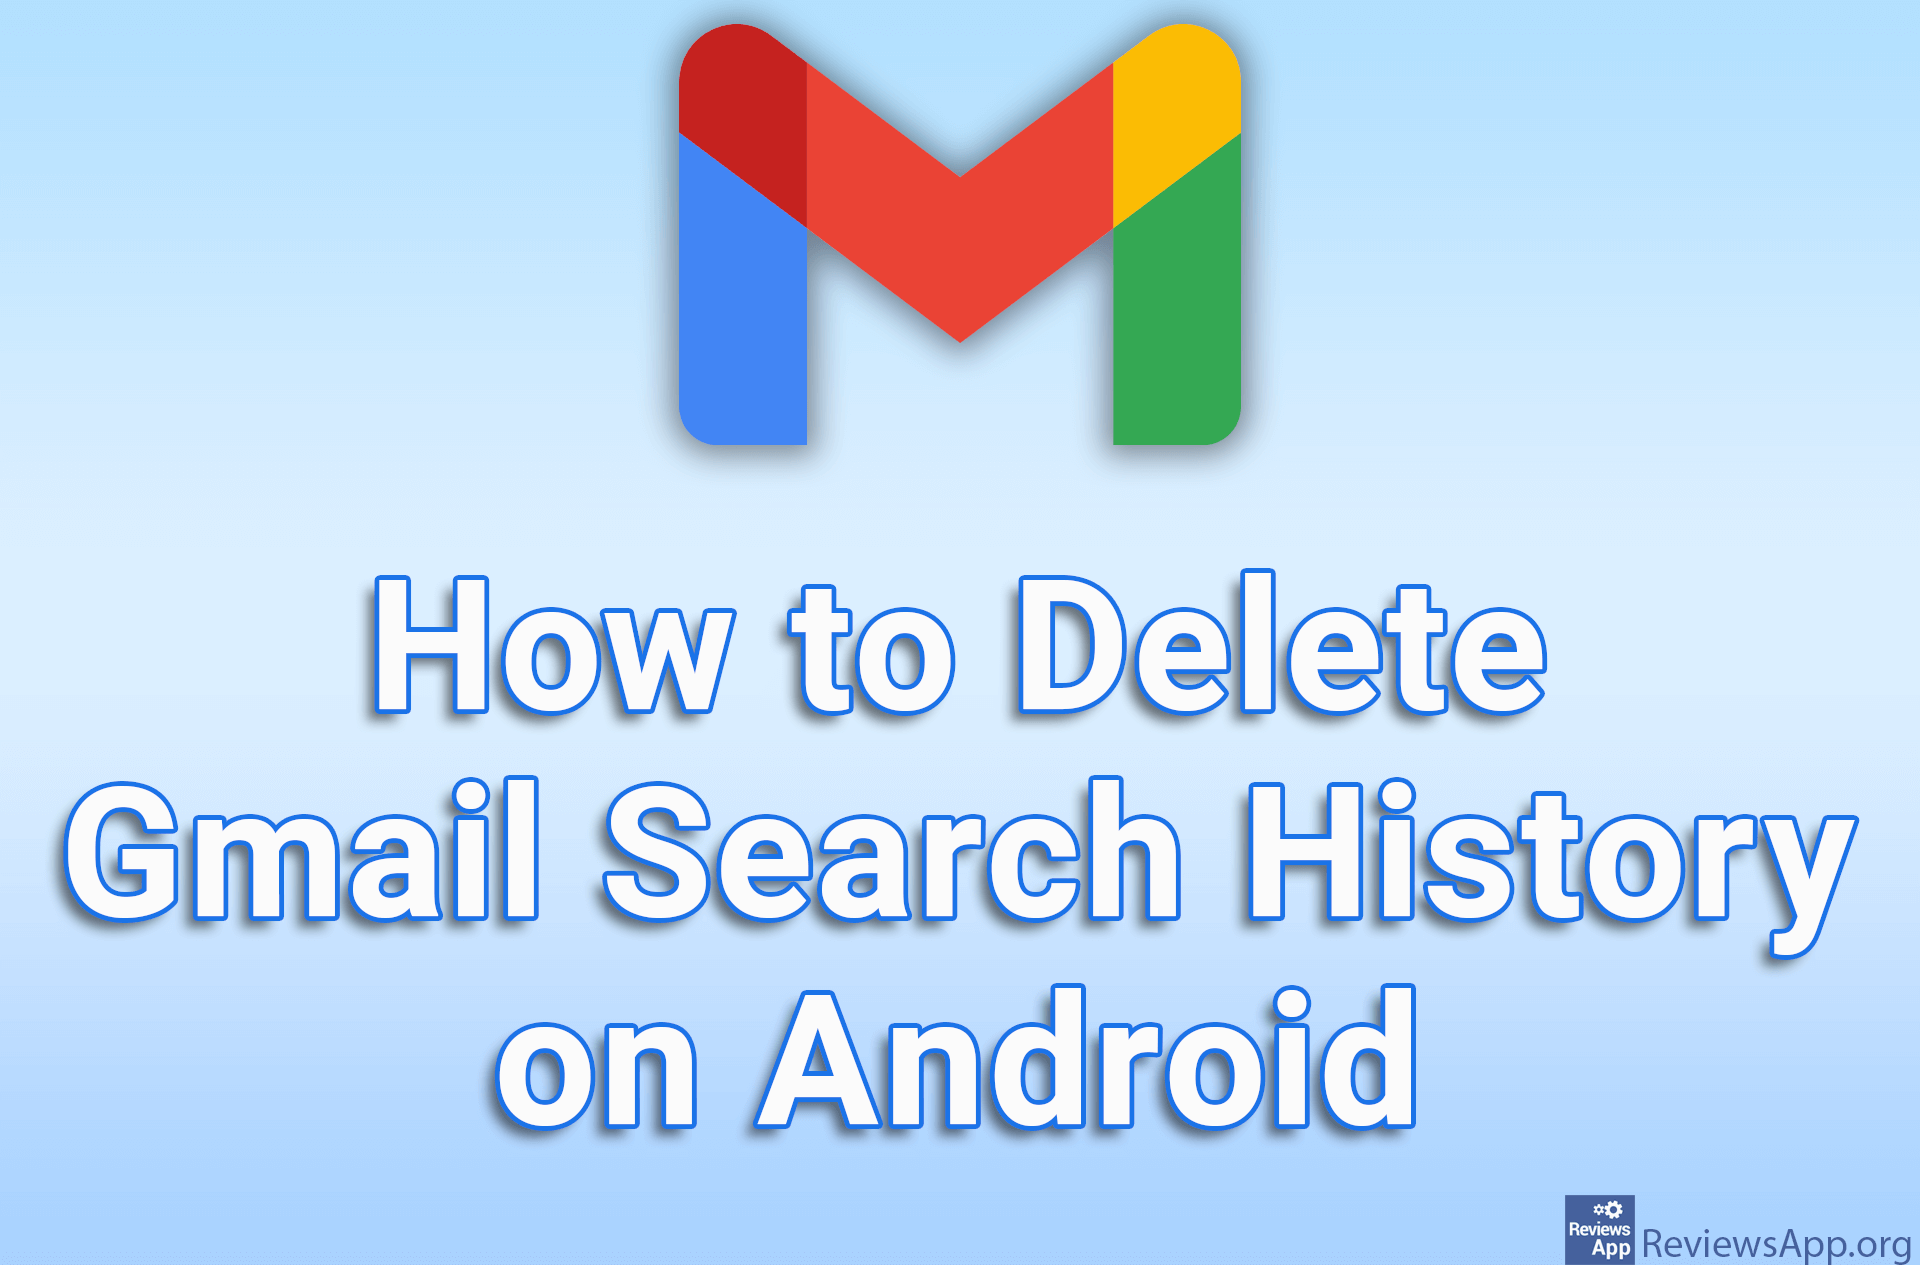 How to Delete Gmail Search History on Android